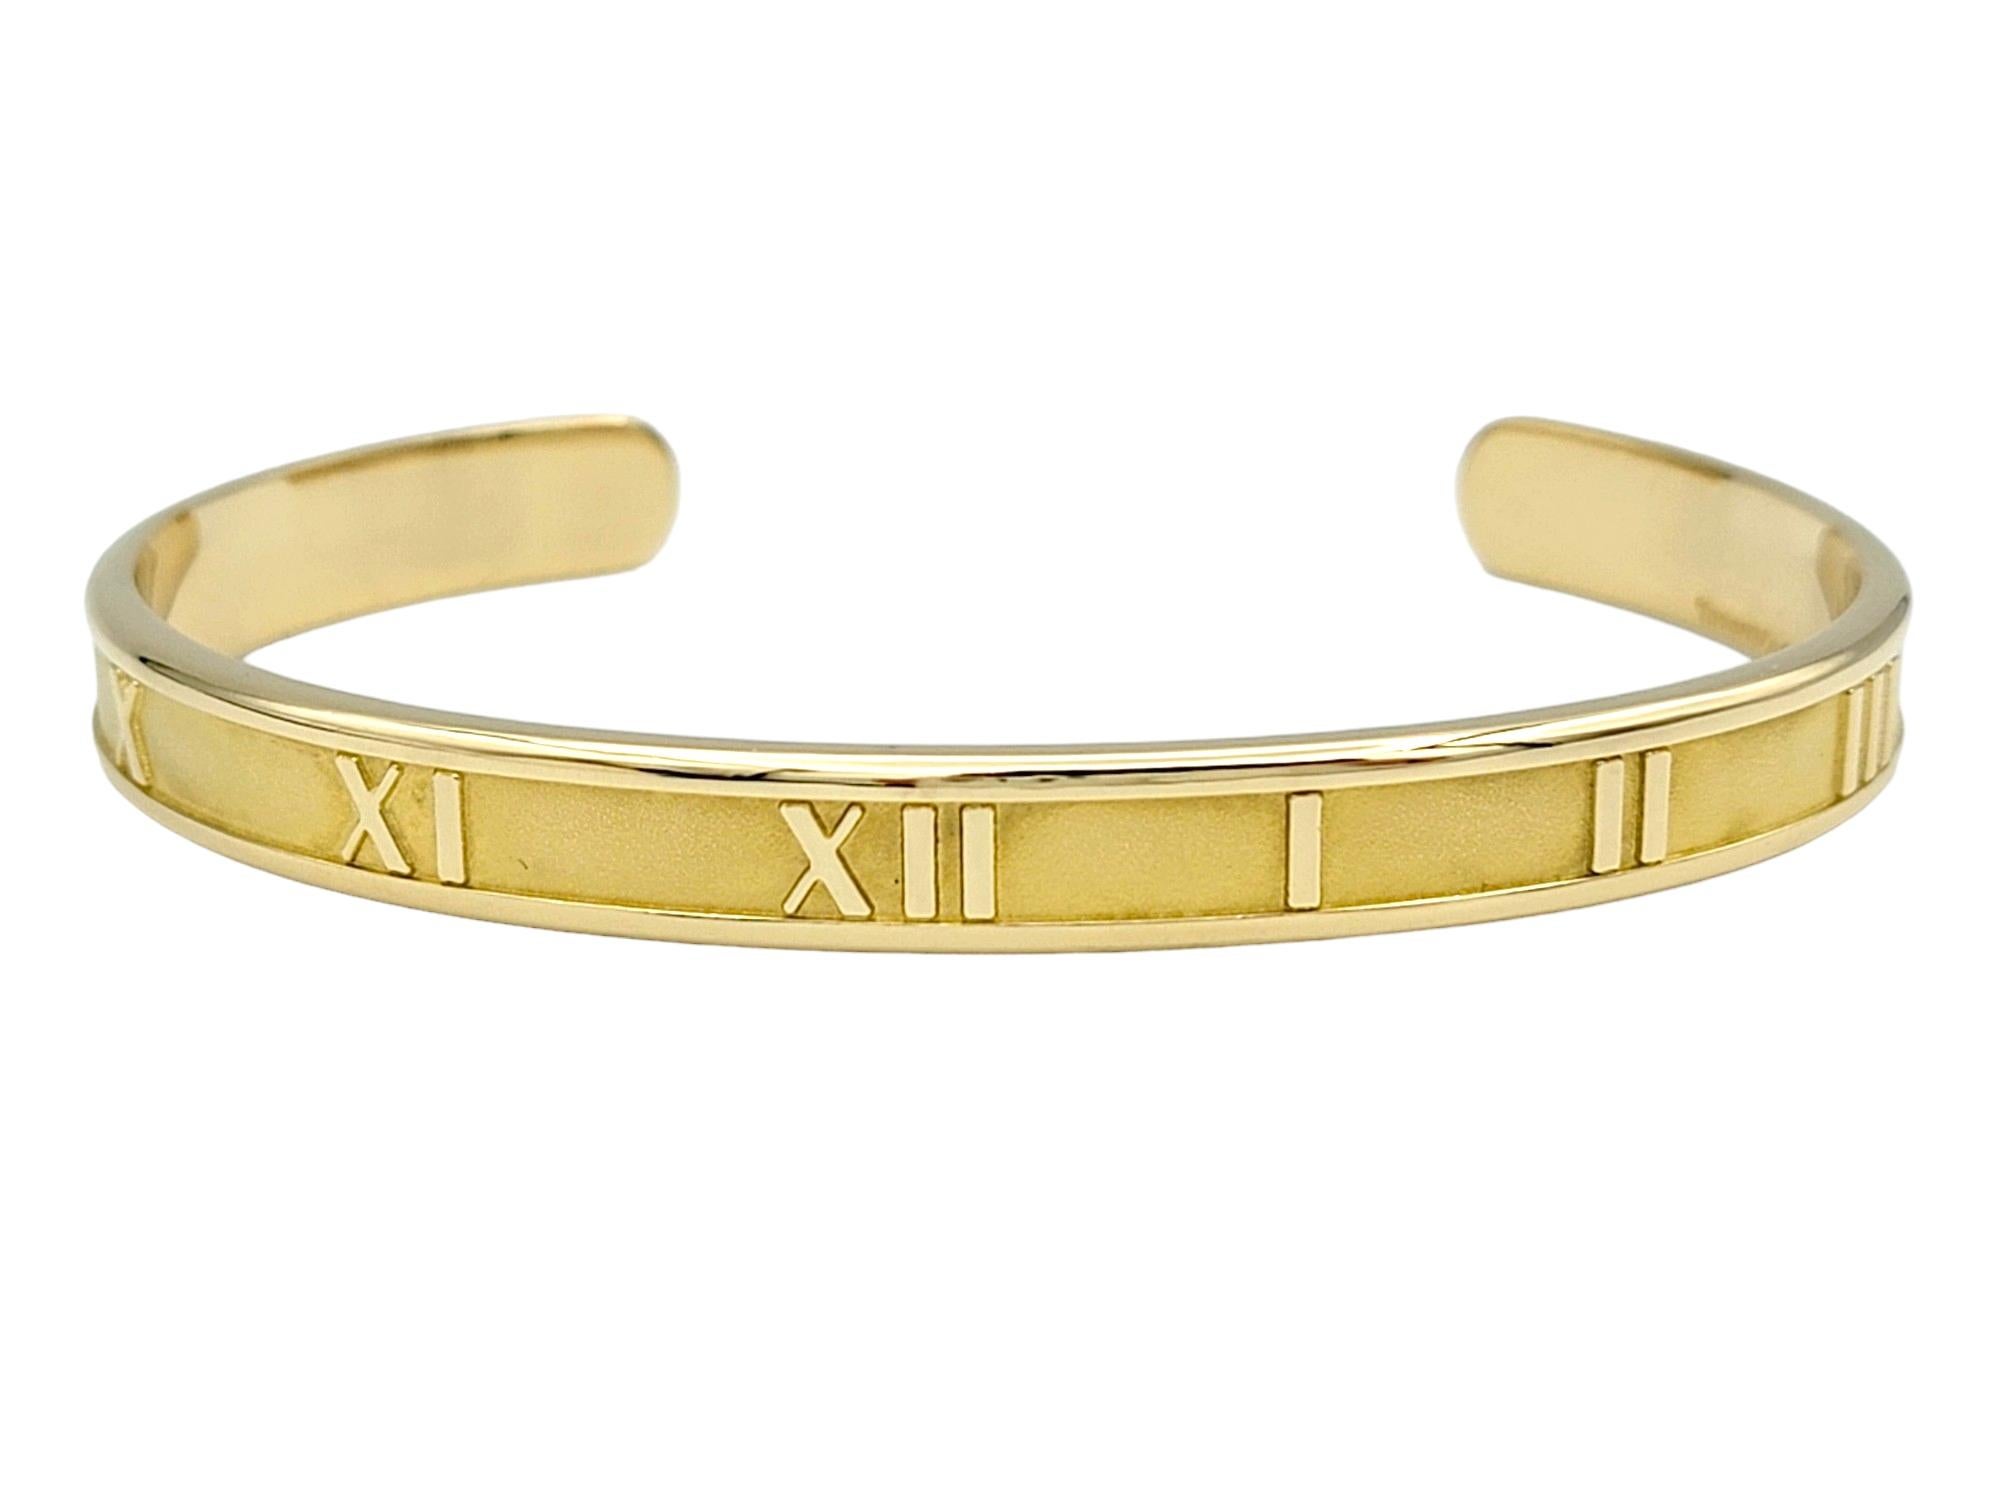 This gorgeous Tiffany & Co. Atlas cuff bracelet in 18 karat yellow gold is a timeless and elegant piece of jewelry that exudes sophistication and luxury. The sleek and minimalist design of the cuff bracelet showcases the bold Roman numeral motif,